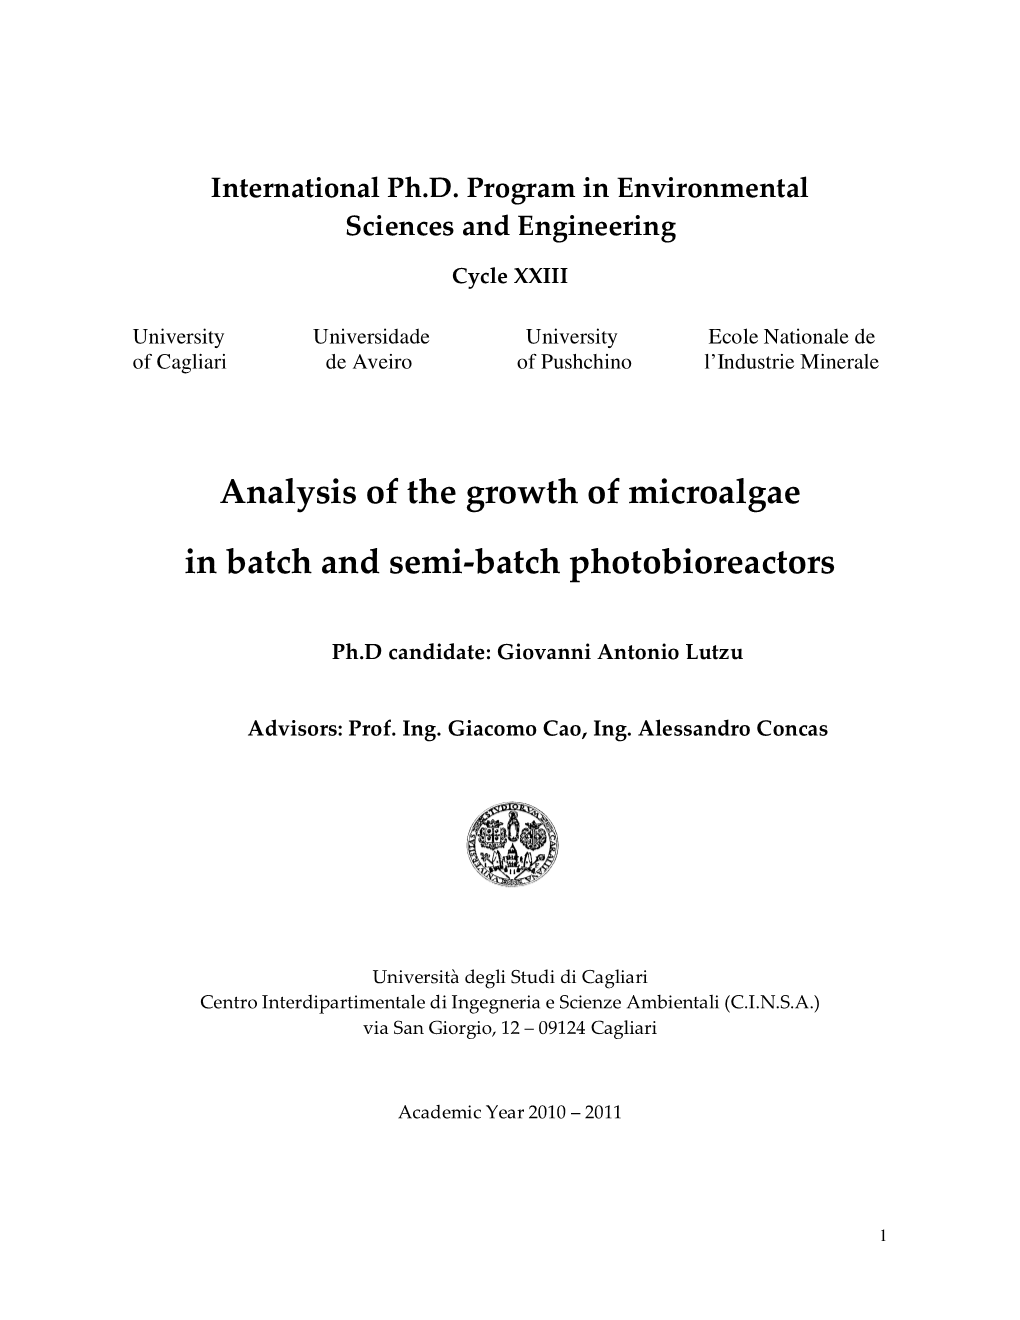 Analysis of the Growth of Microalgae in Batch and Semi-Batch